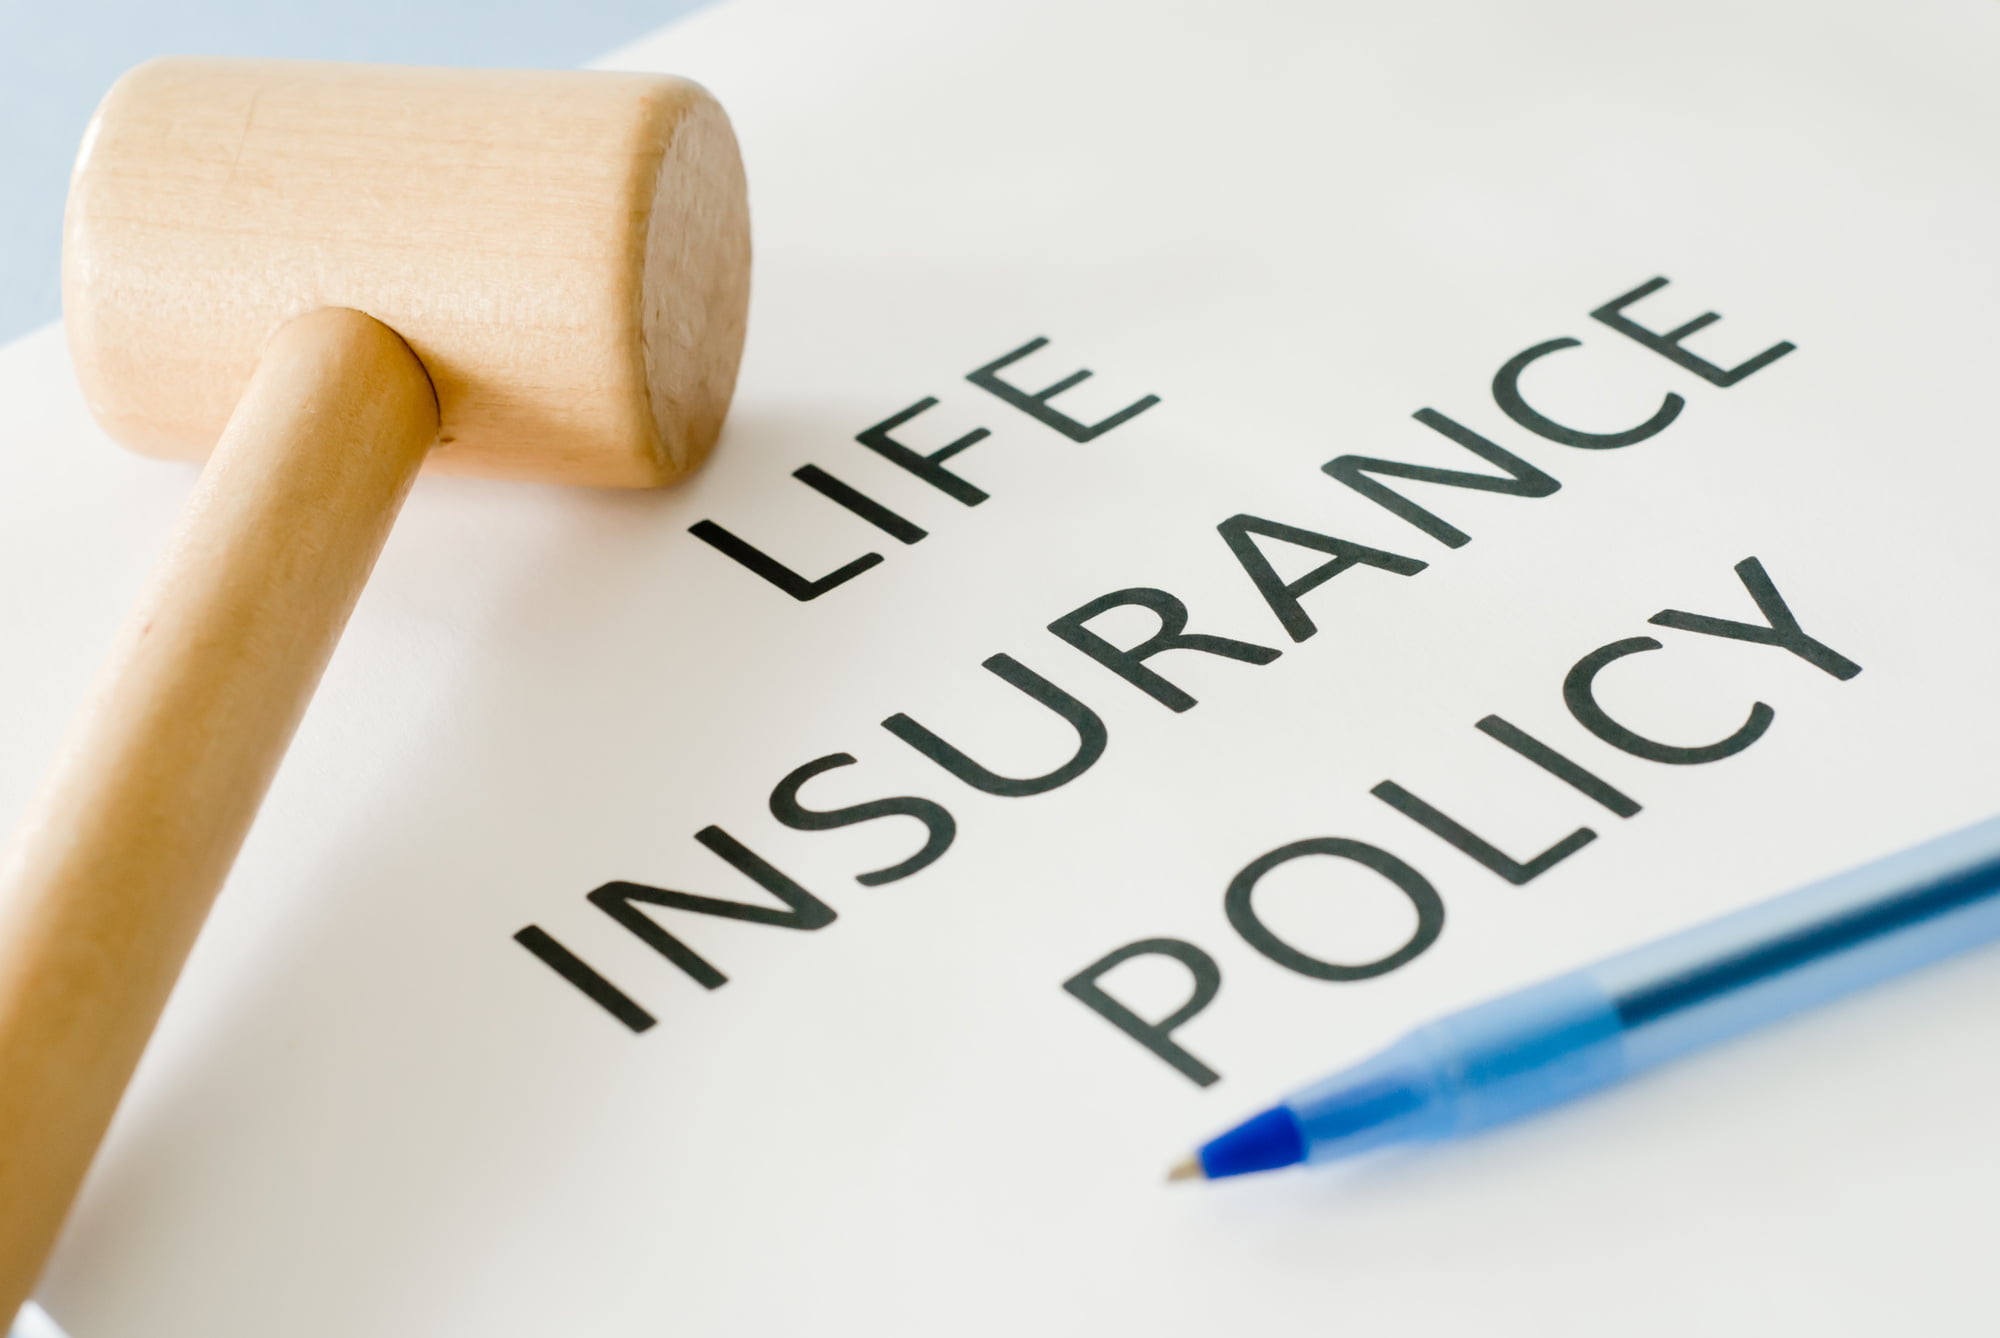 Permanent Life Insurance vs Term: What Are the Differences?